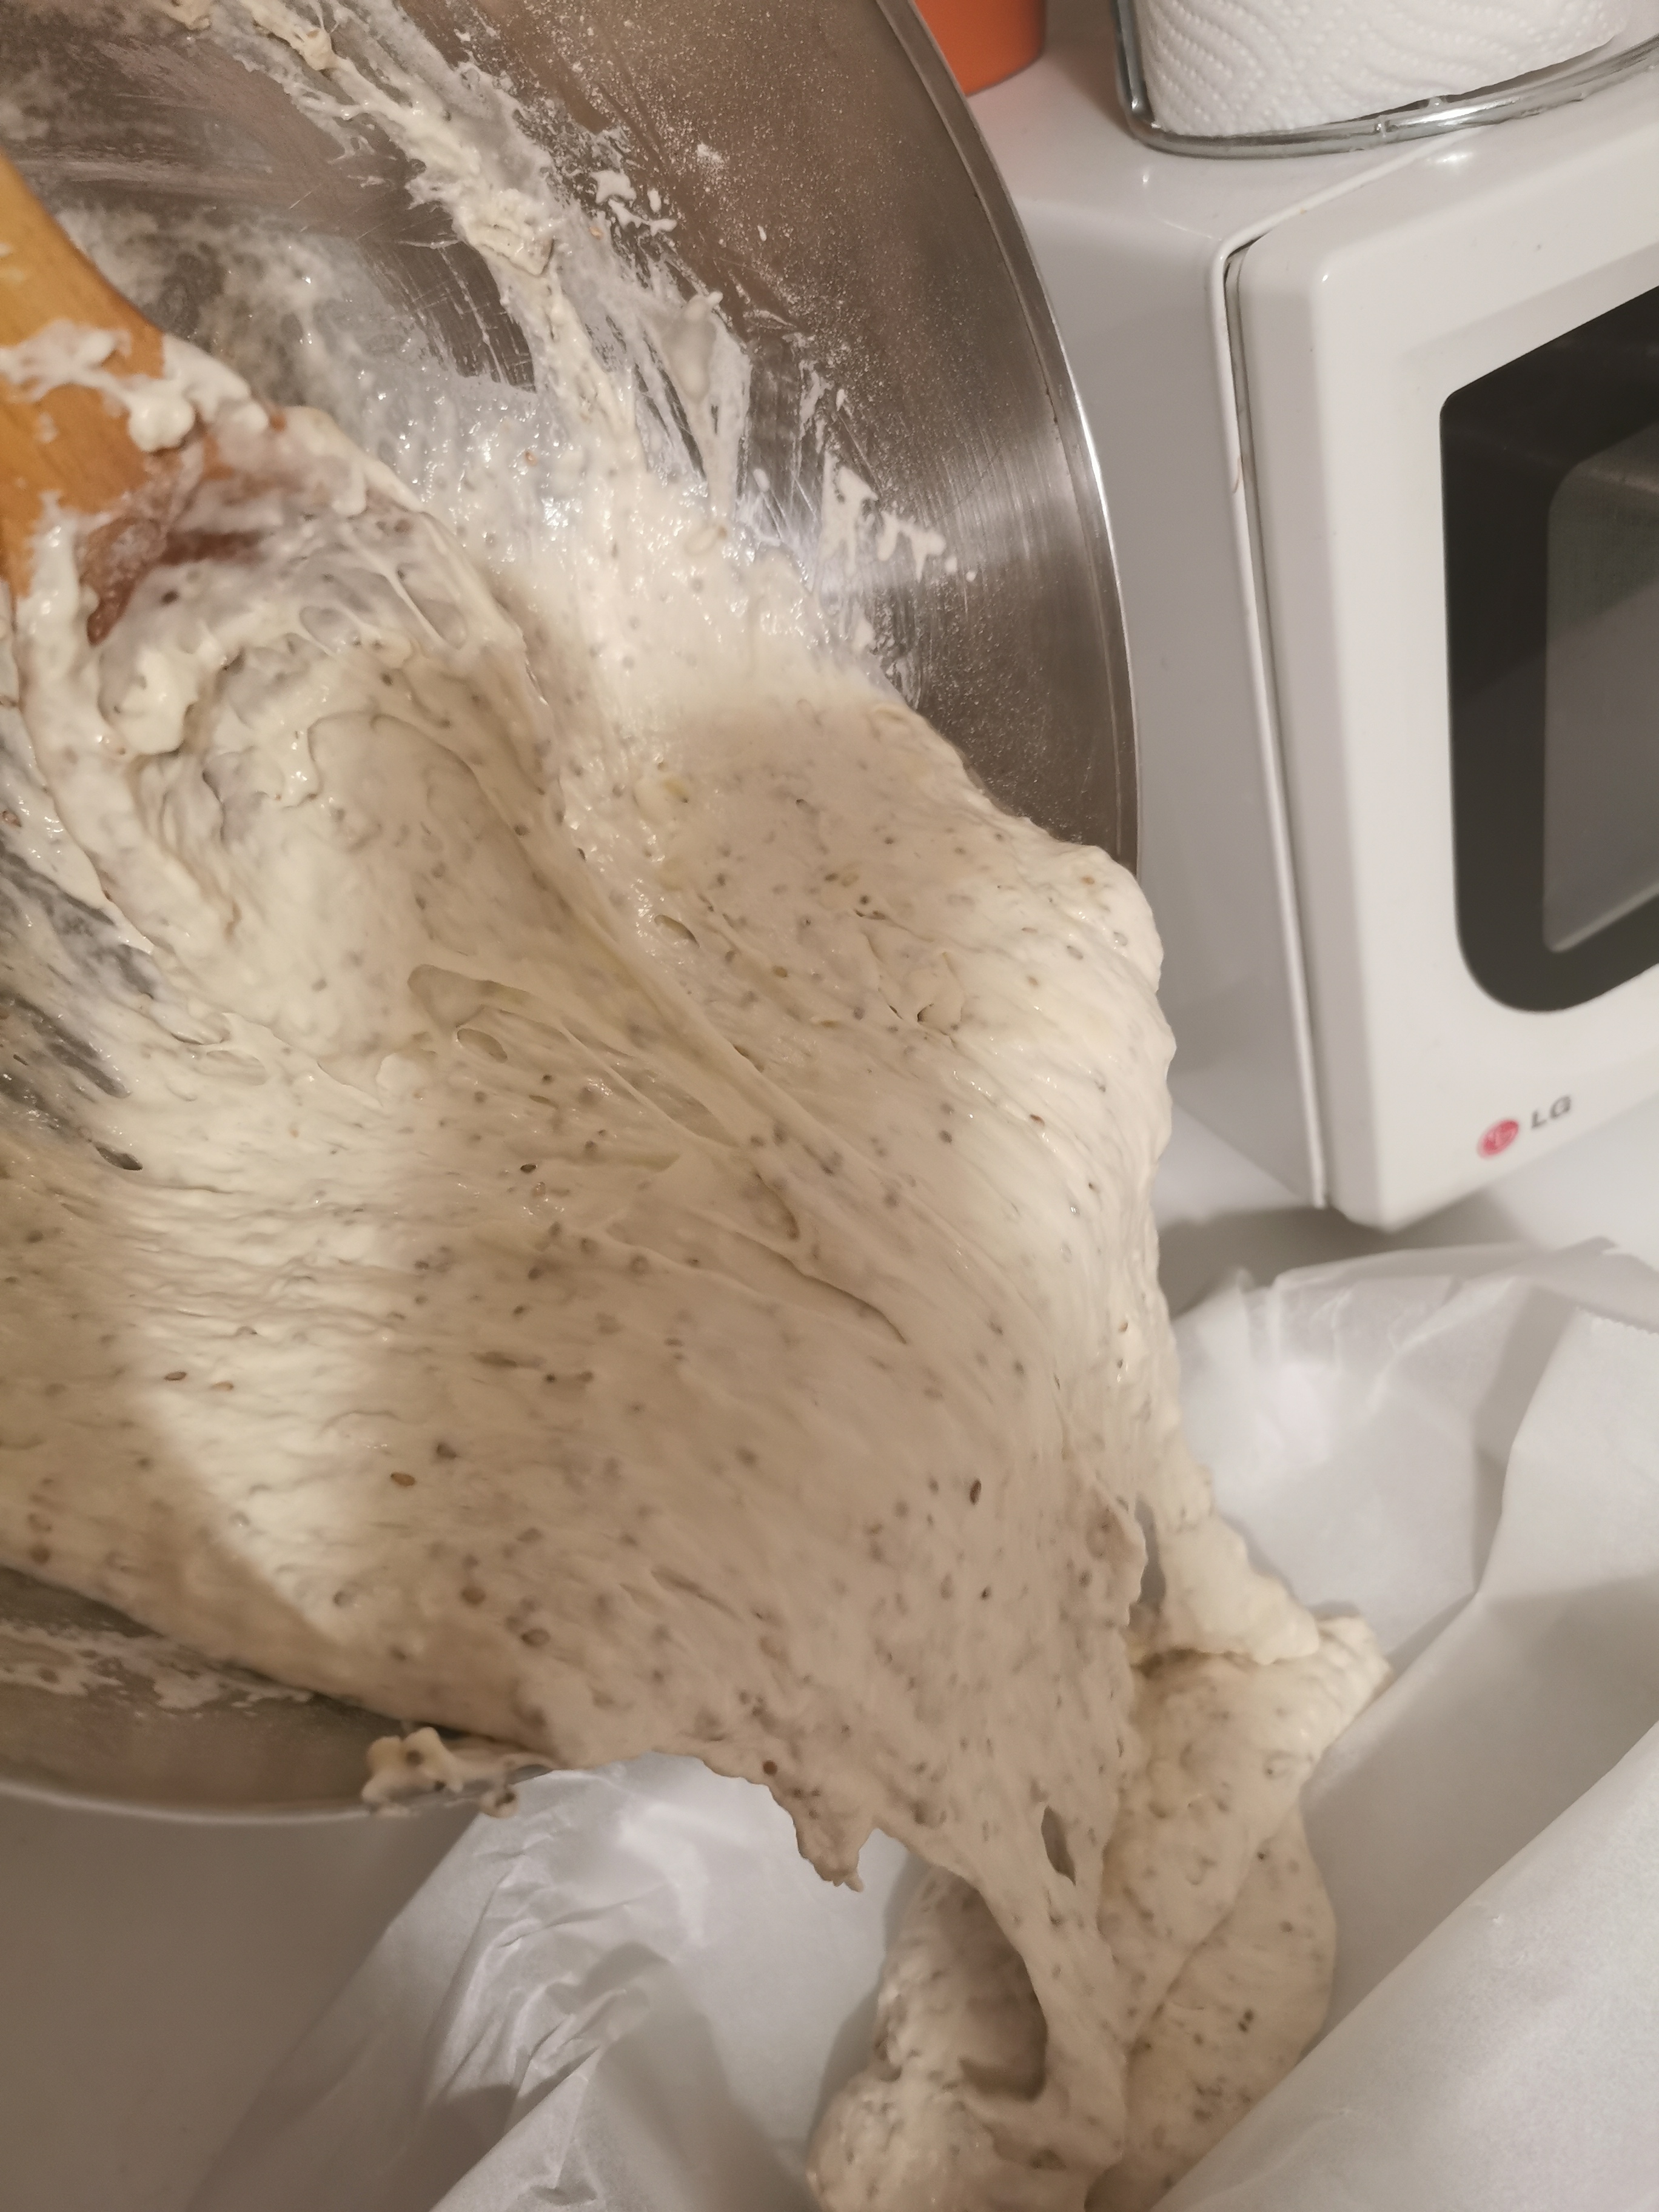 Yeasty dough pouring